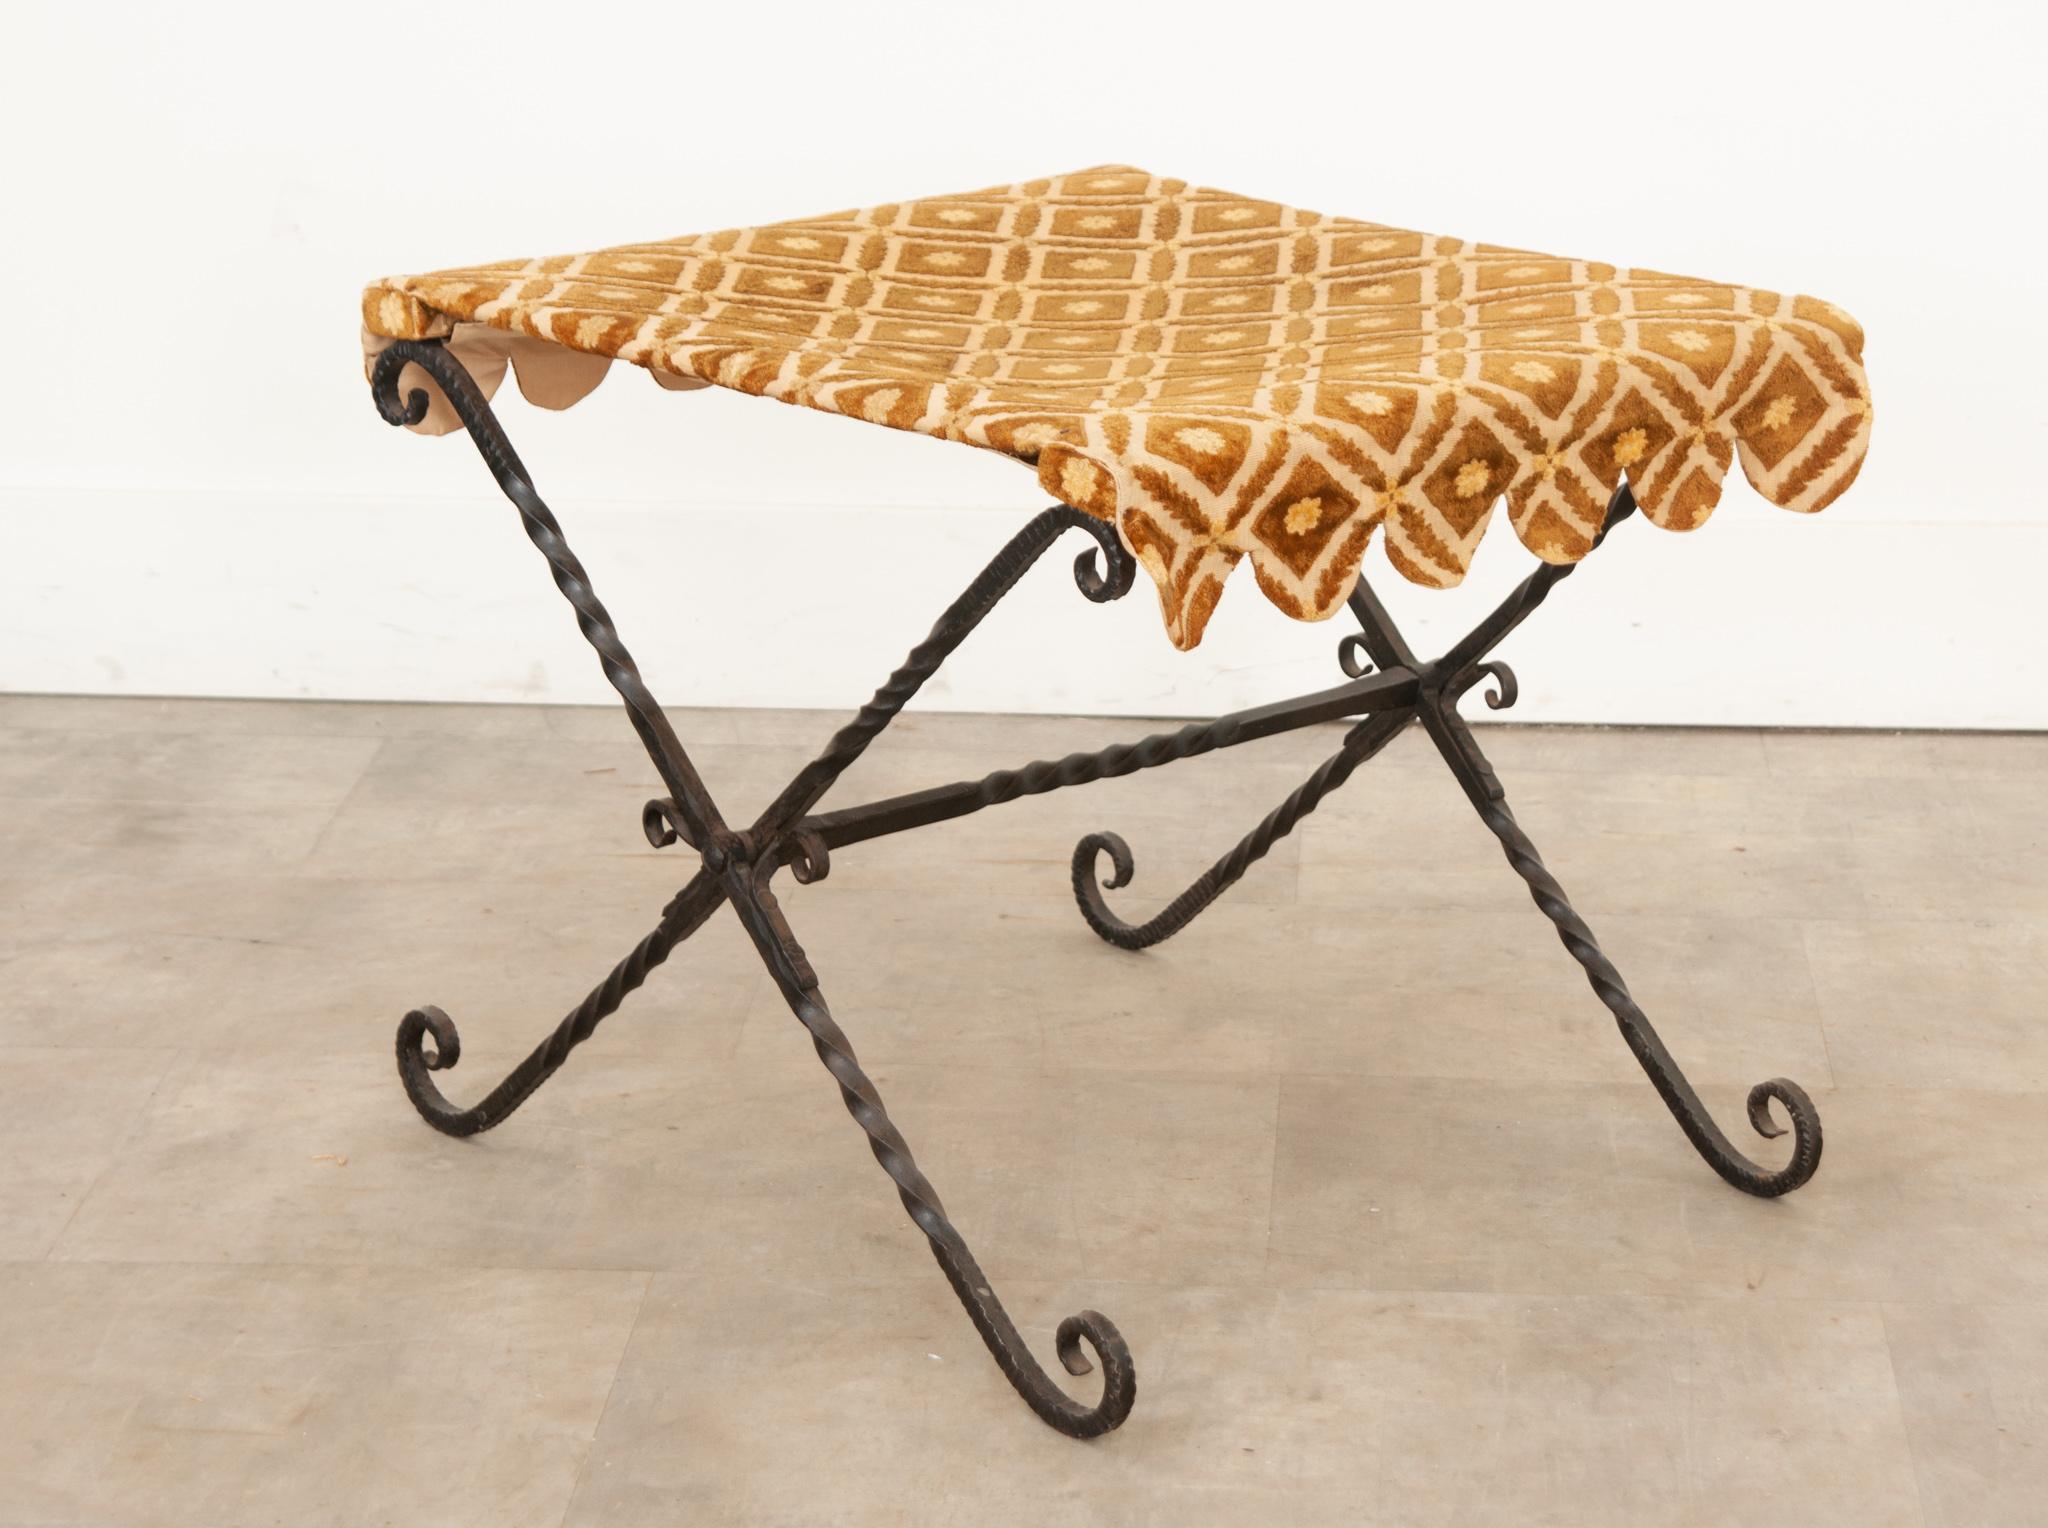 A wonderful vintage hand forged wrought-iron folding stool with vintage scalloped edge fabric. A hand-forged twisty and curling X-base with connecting stretcher is topped with plush goldenrod colored fabric. For use as a portable seat or side table.